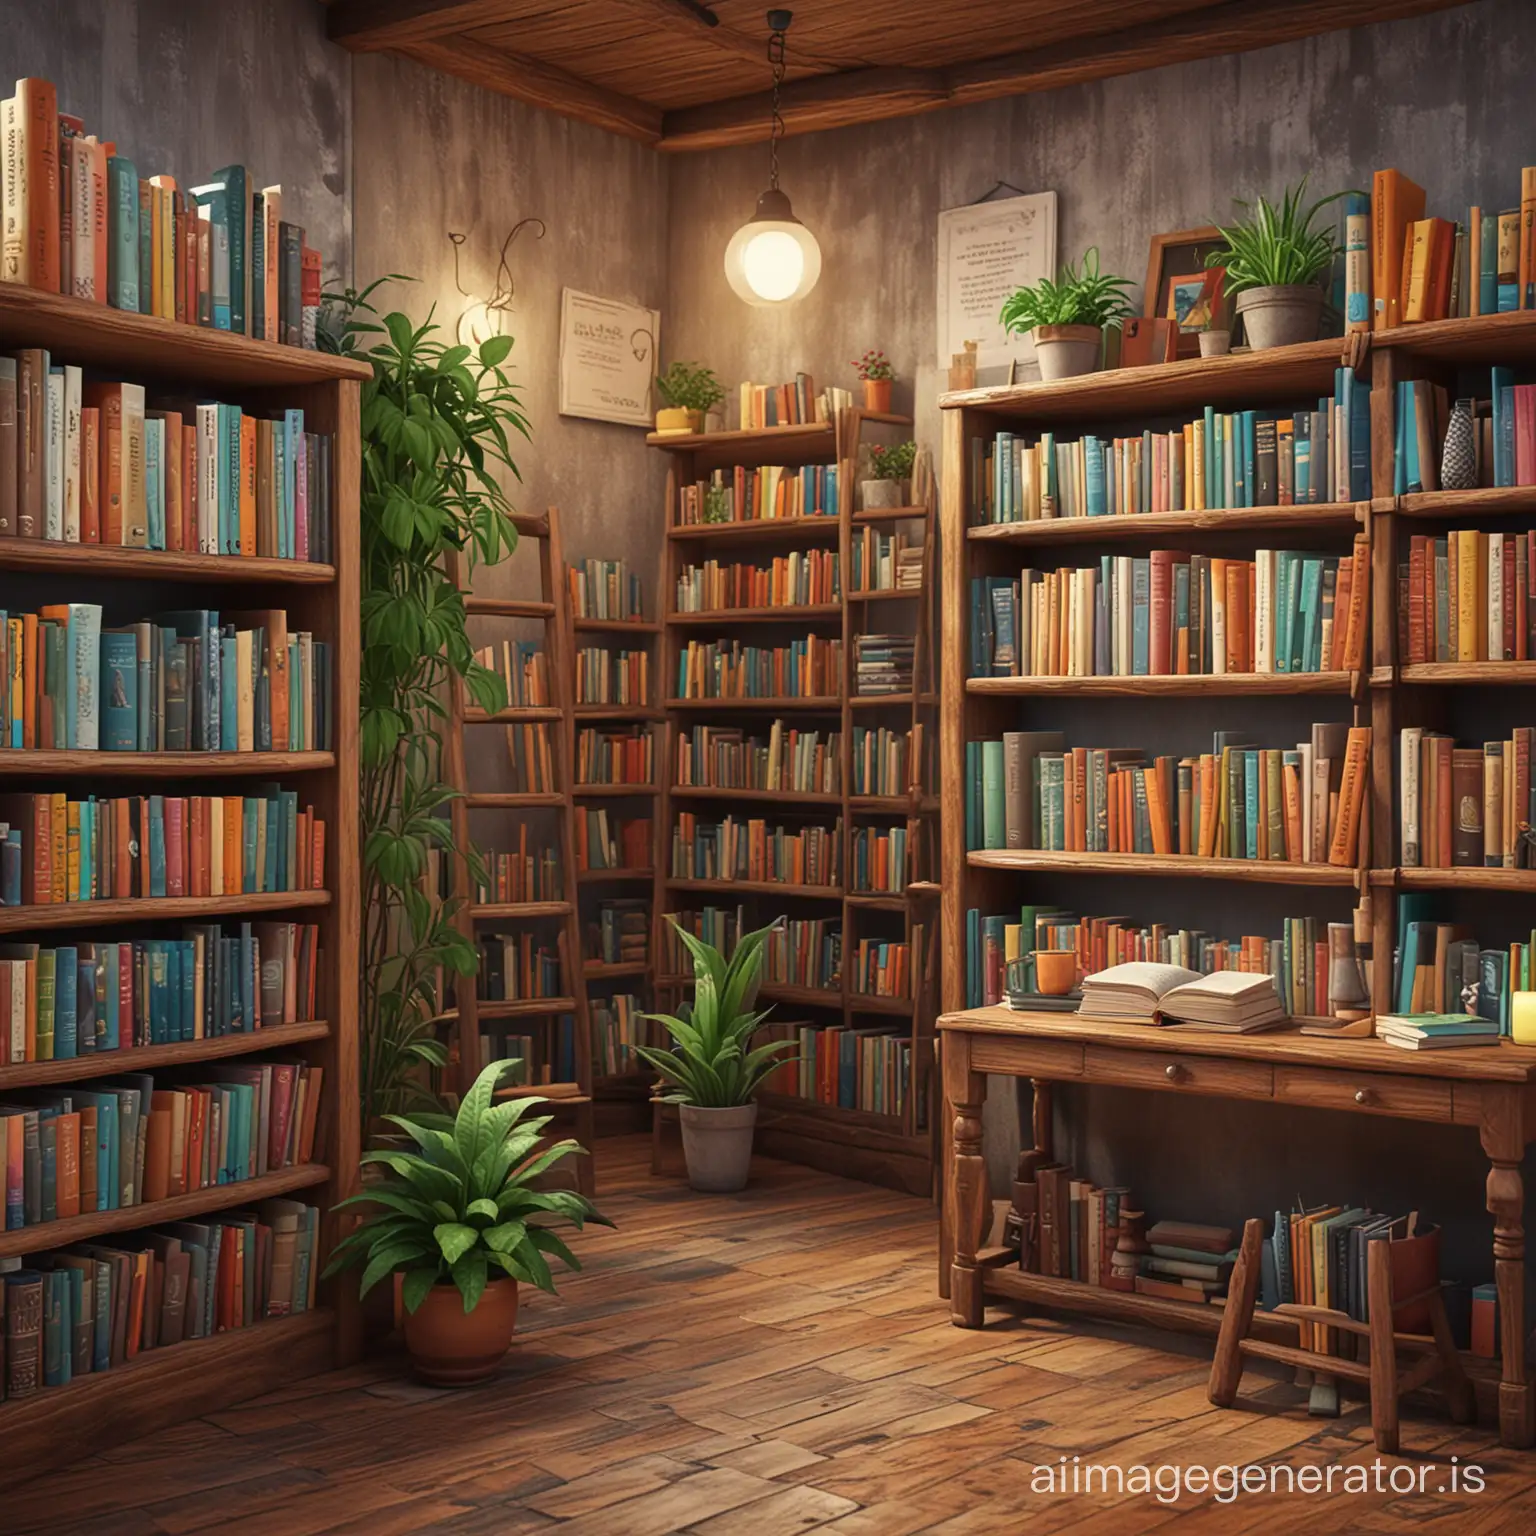 inside old book shop, with colourful books on shelf, a few plants, tables with books, cartoon, 3d, render, 4k